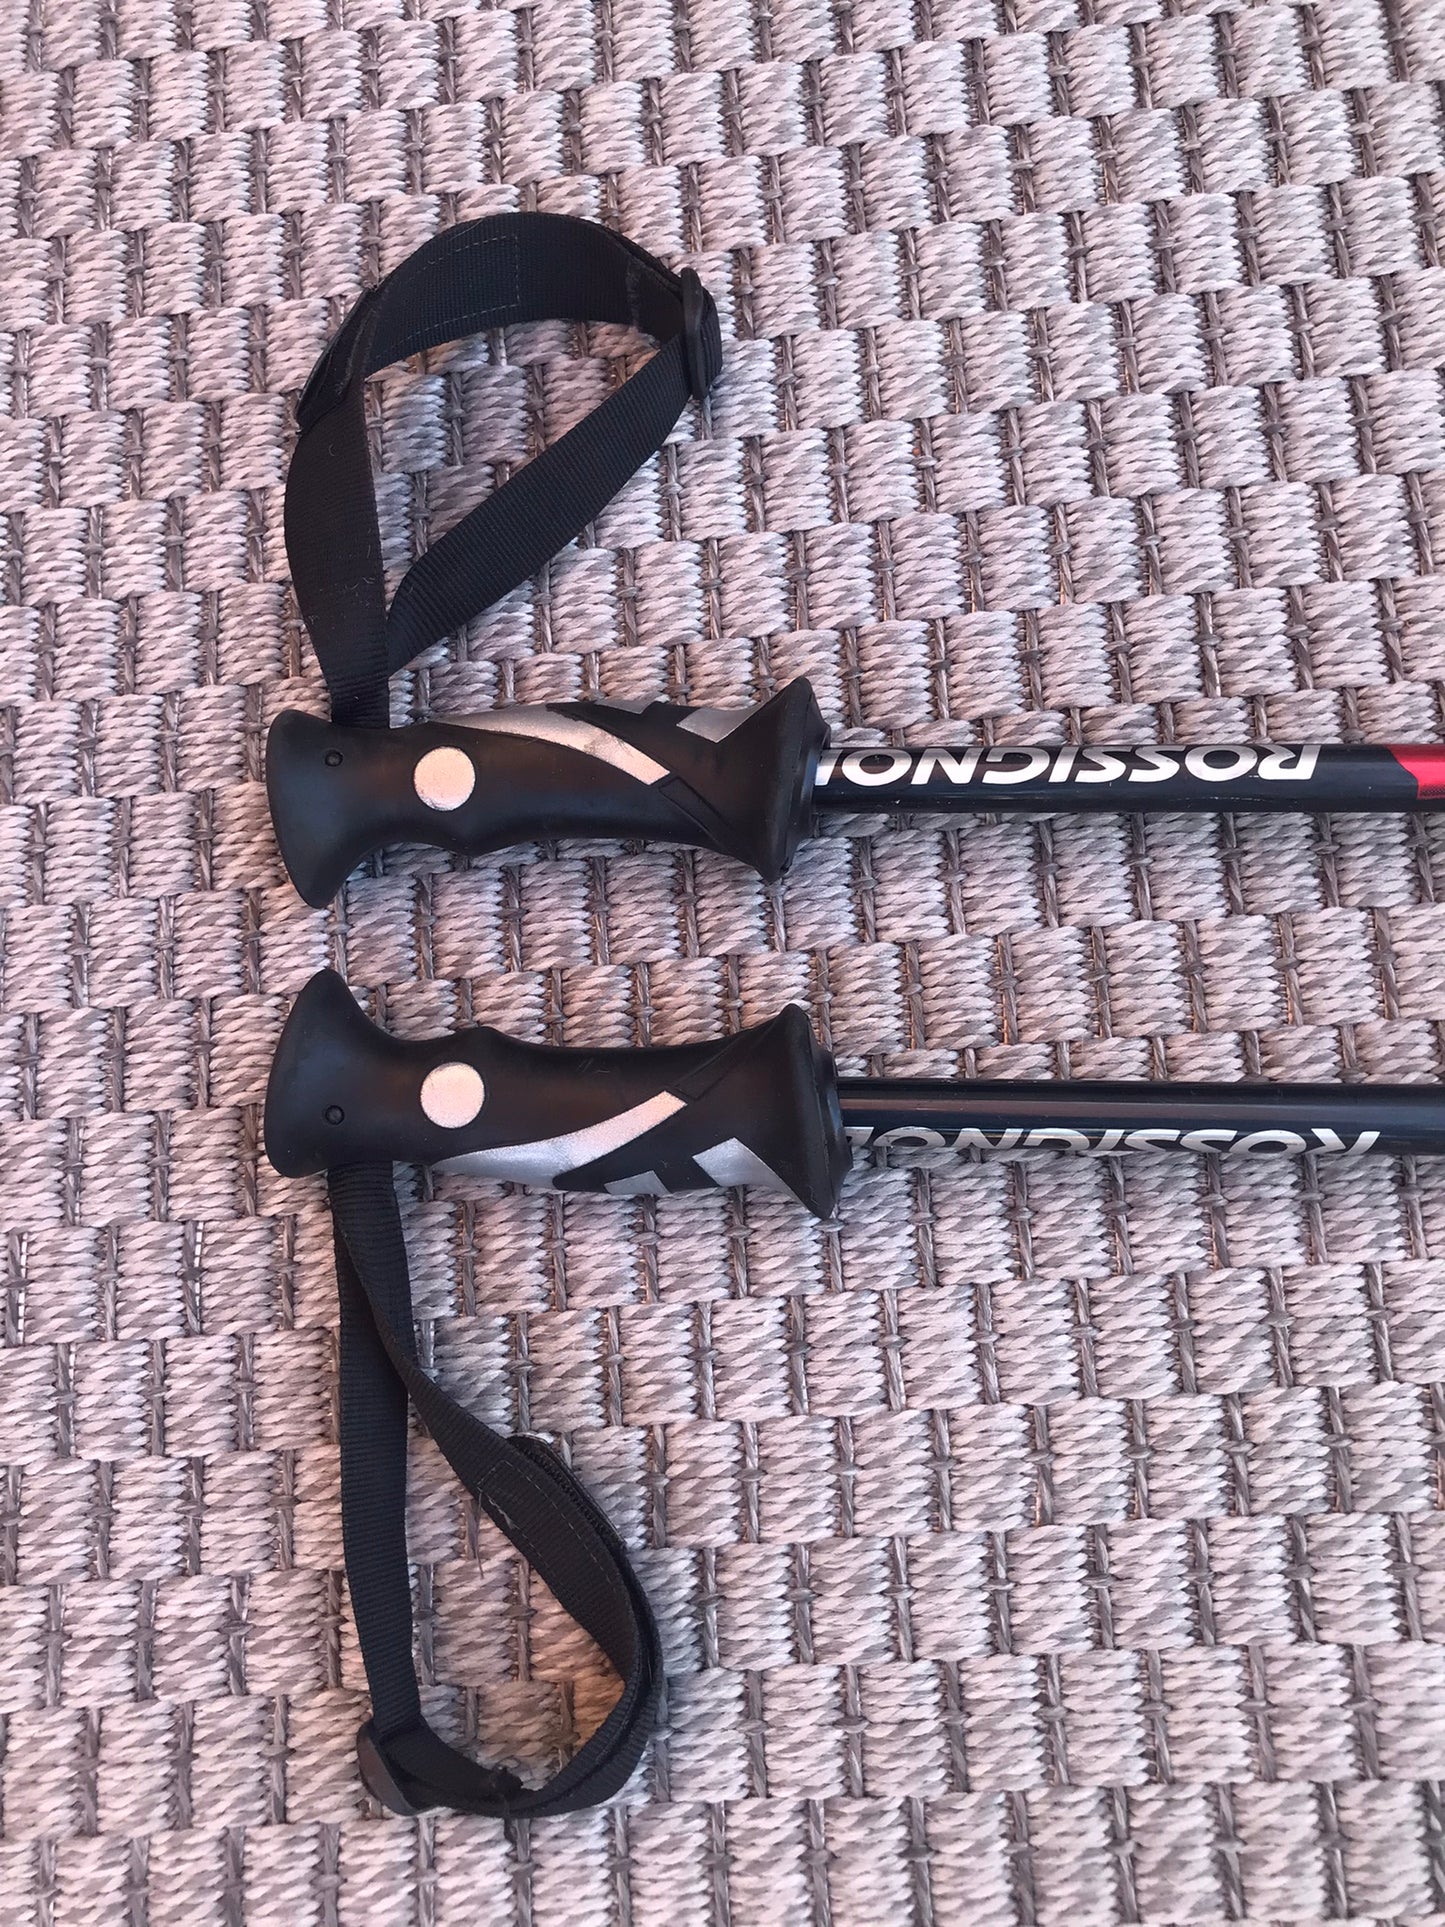 Ski Poles Adult Size 48 inch 120 cm Rossignol Black Red With Rubber Handles Excellent